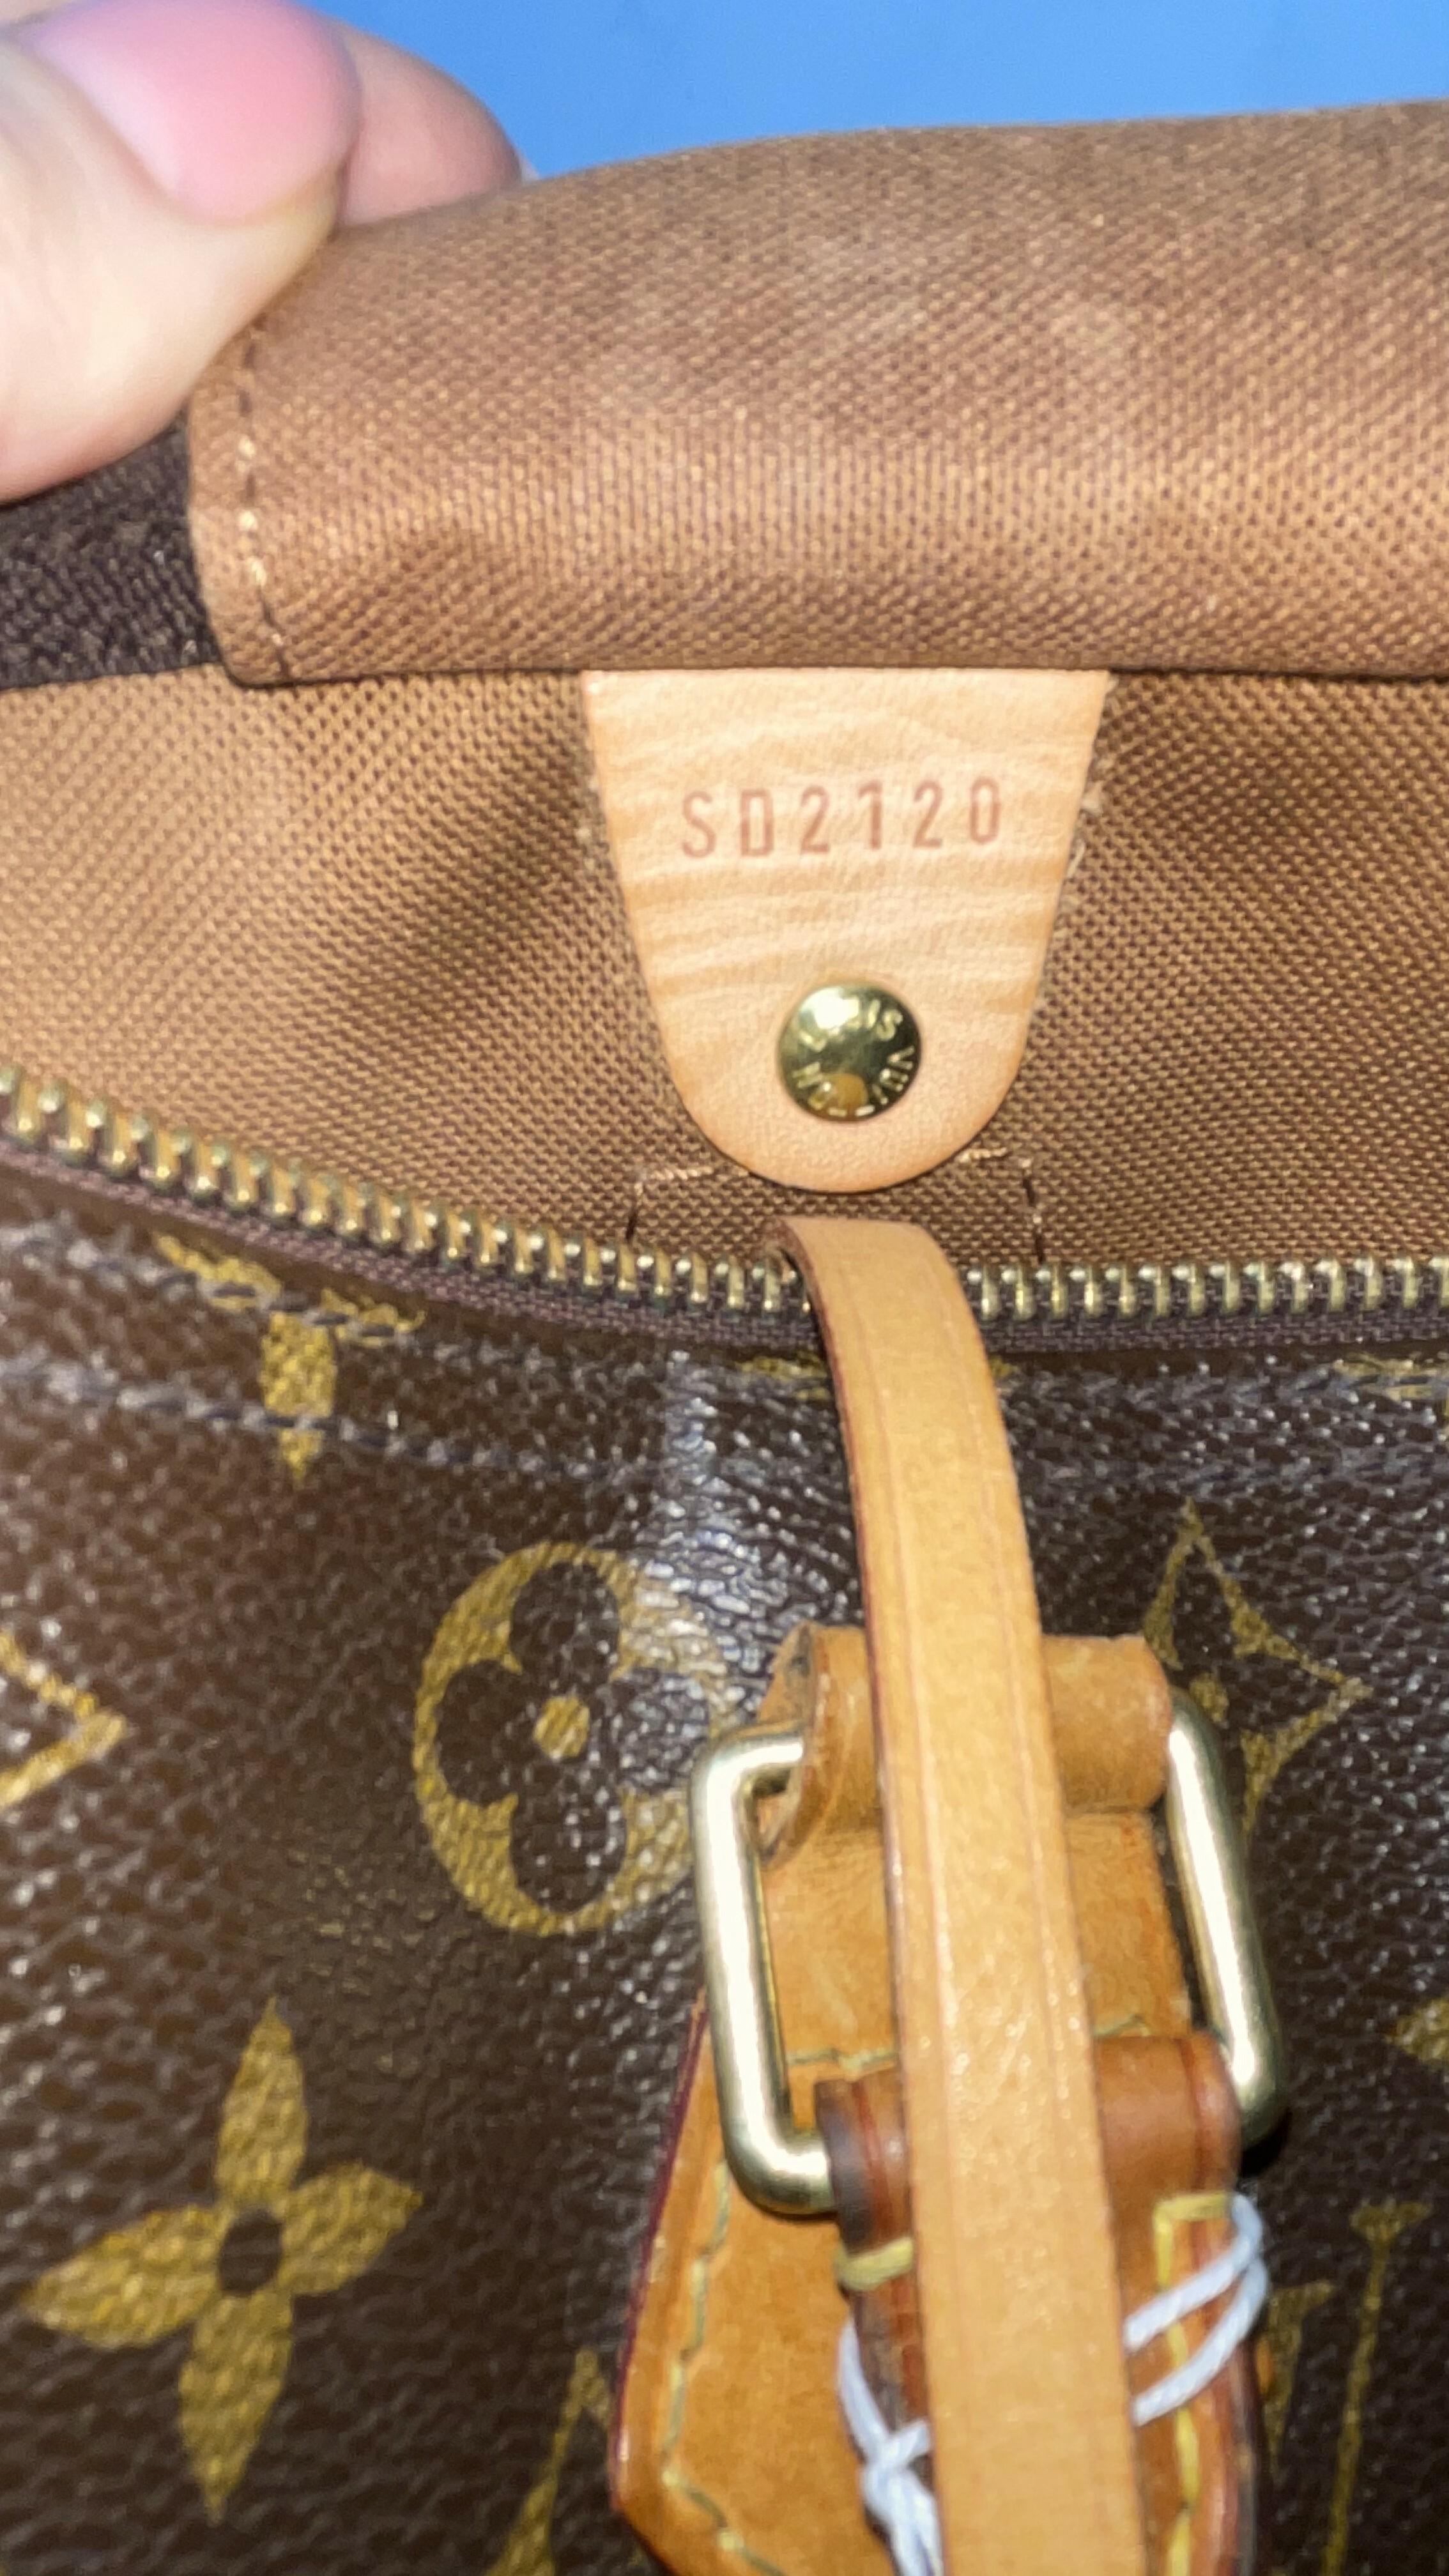 Shop Louis Vuitton Boston Bags by えぷた